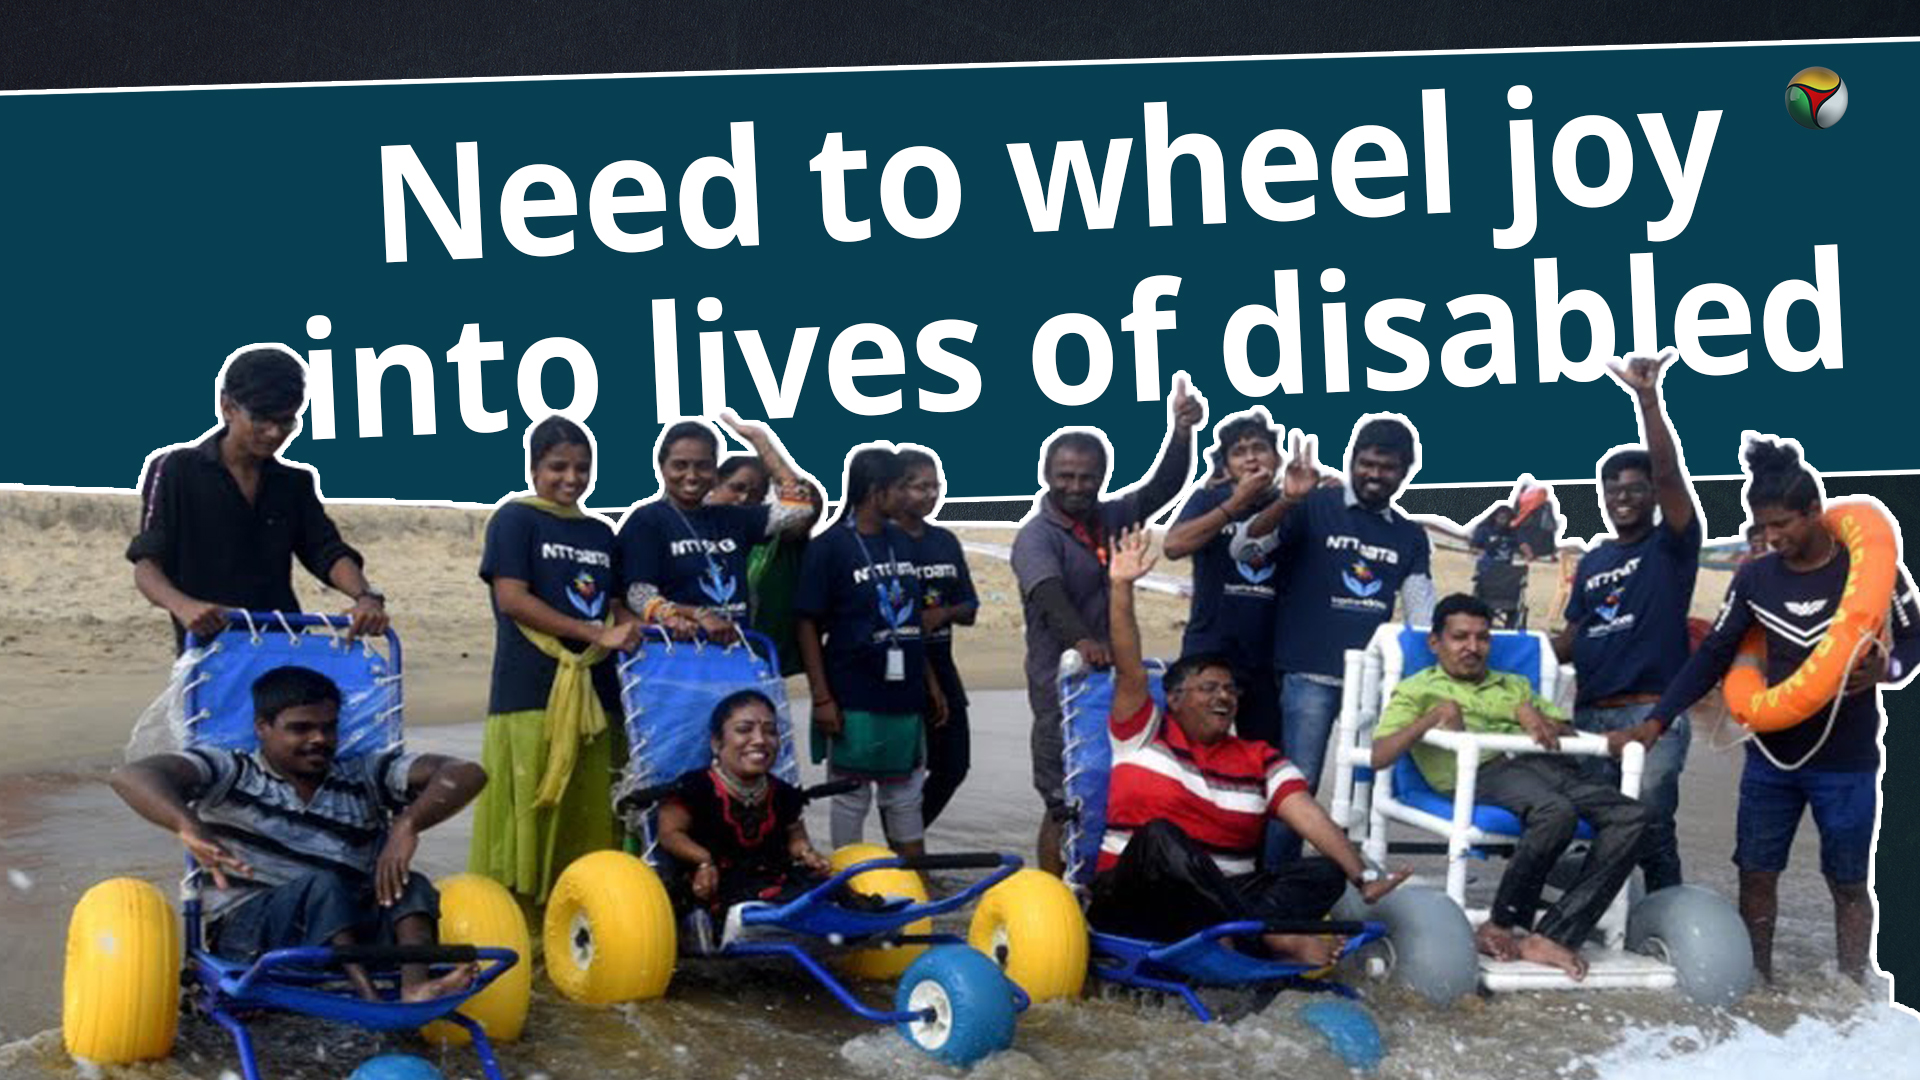 Need to wheel joy into lives of disabled